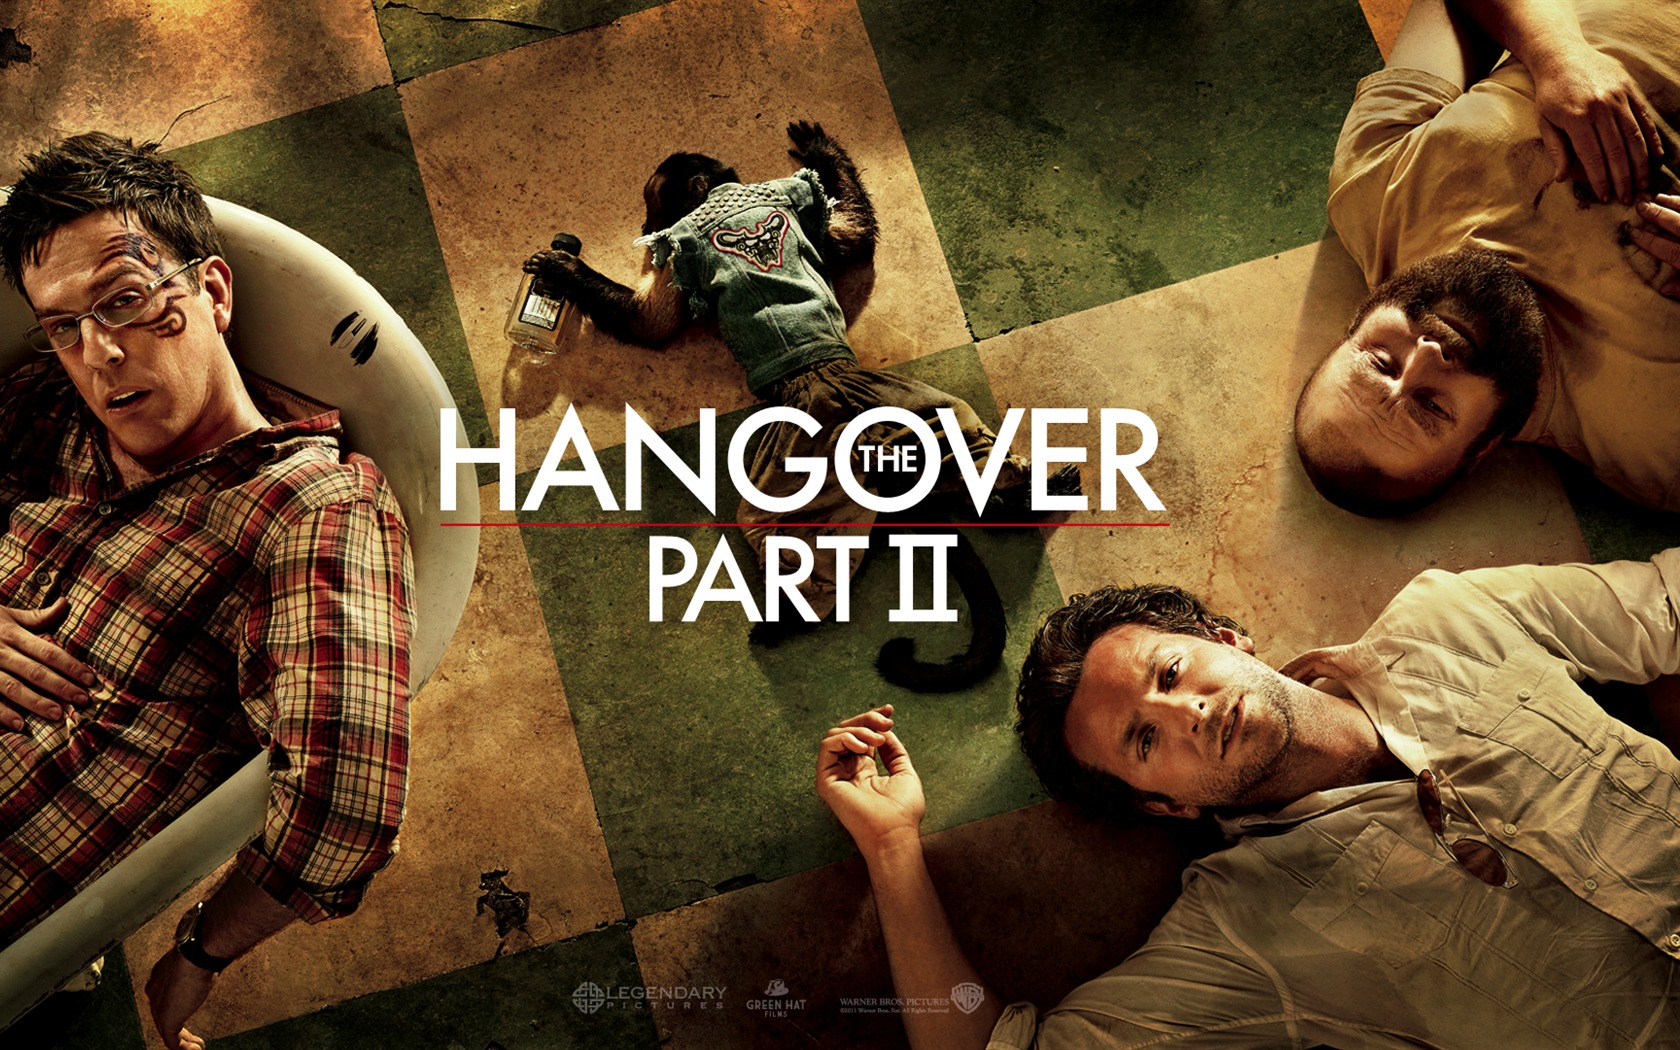 The Hangover část II tapety #1 - 1680x1050